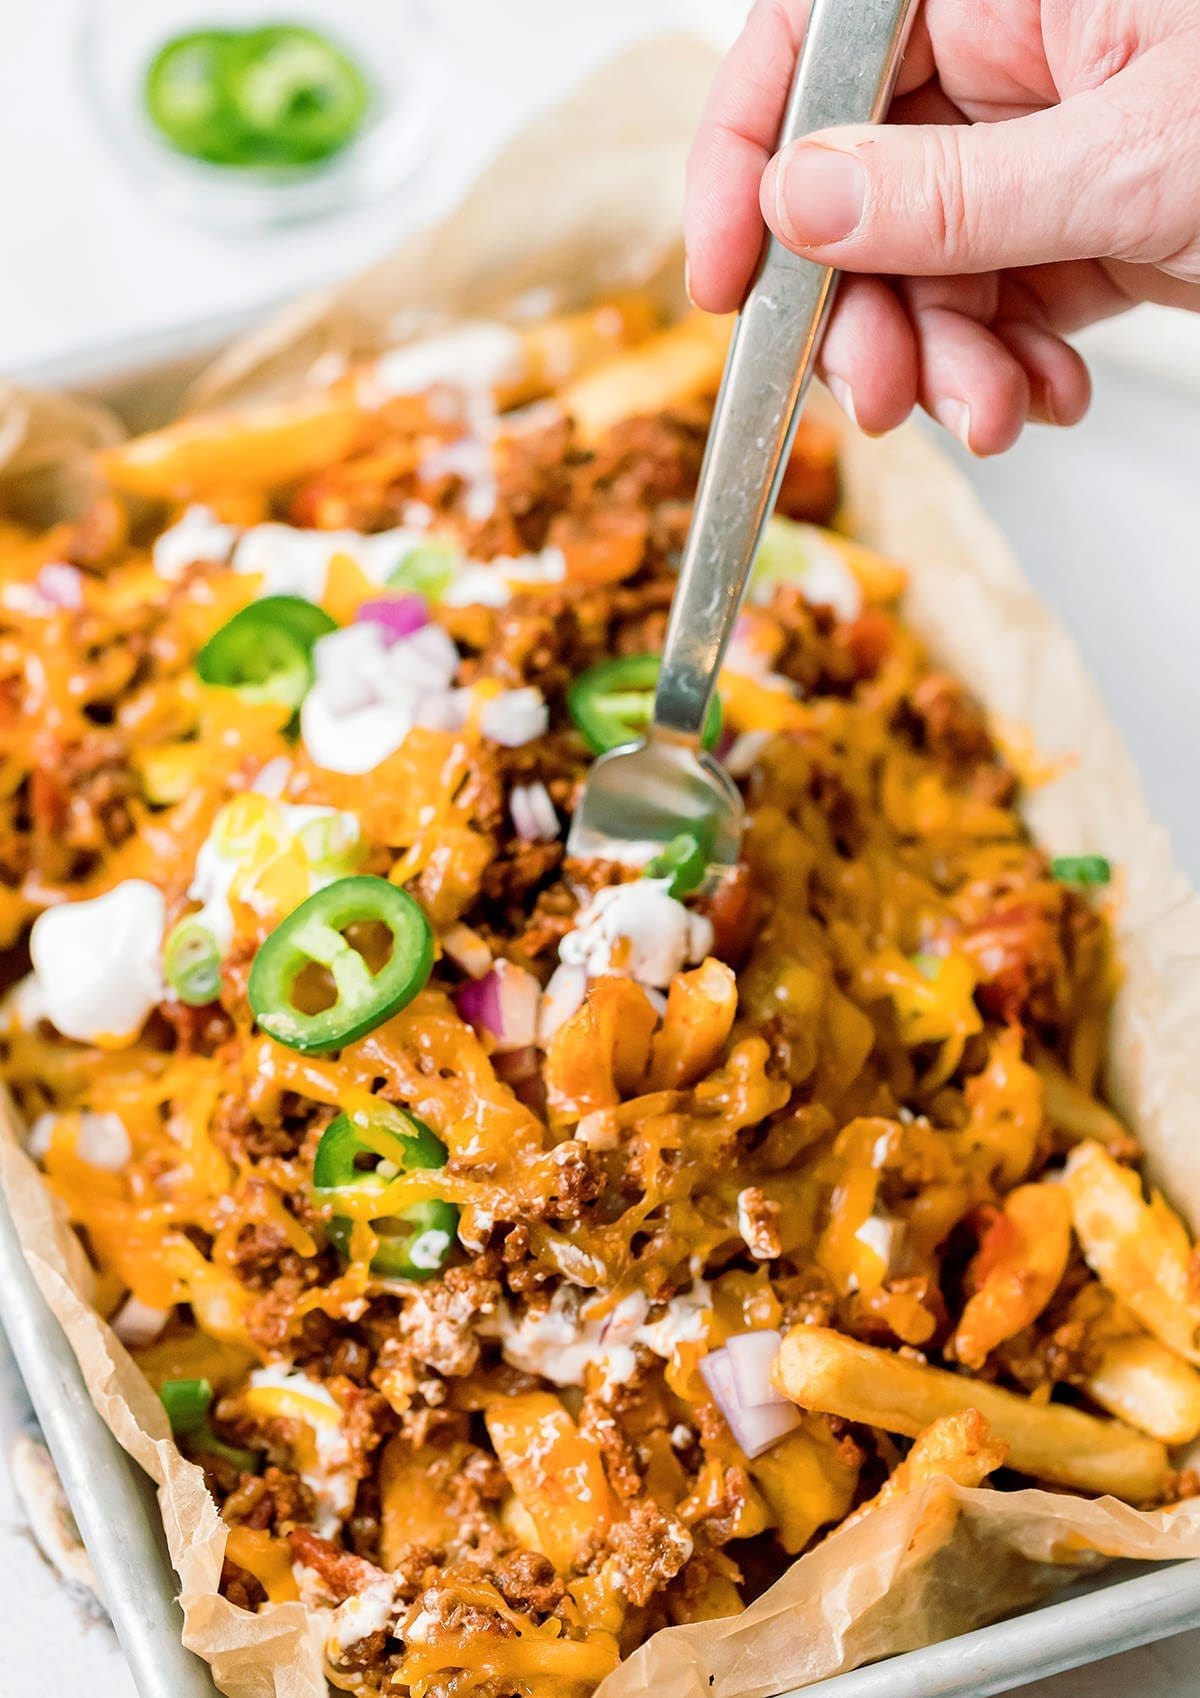 Fork digging into a tray of chili cheese fries.